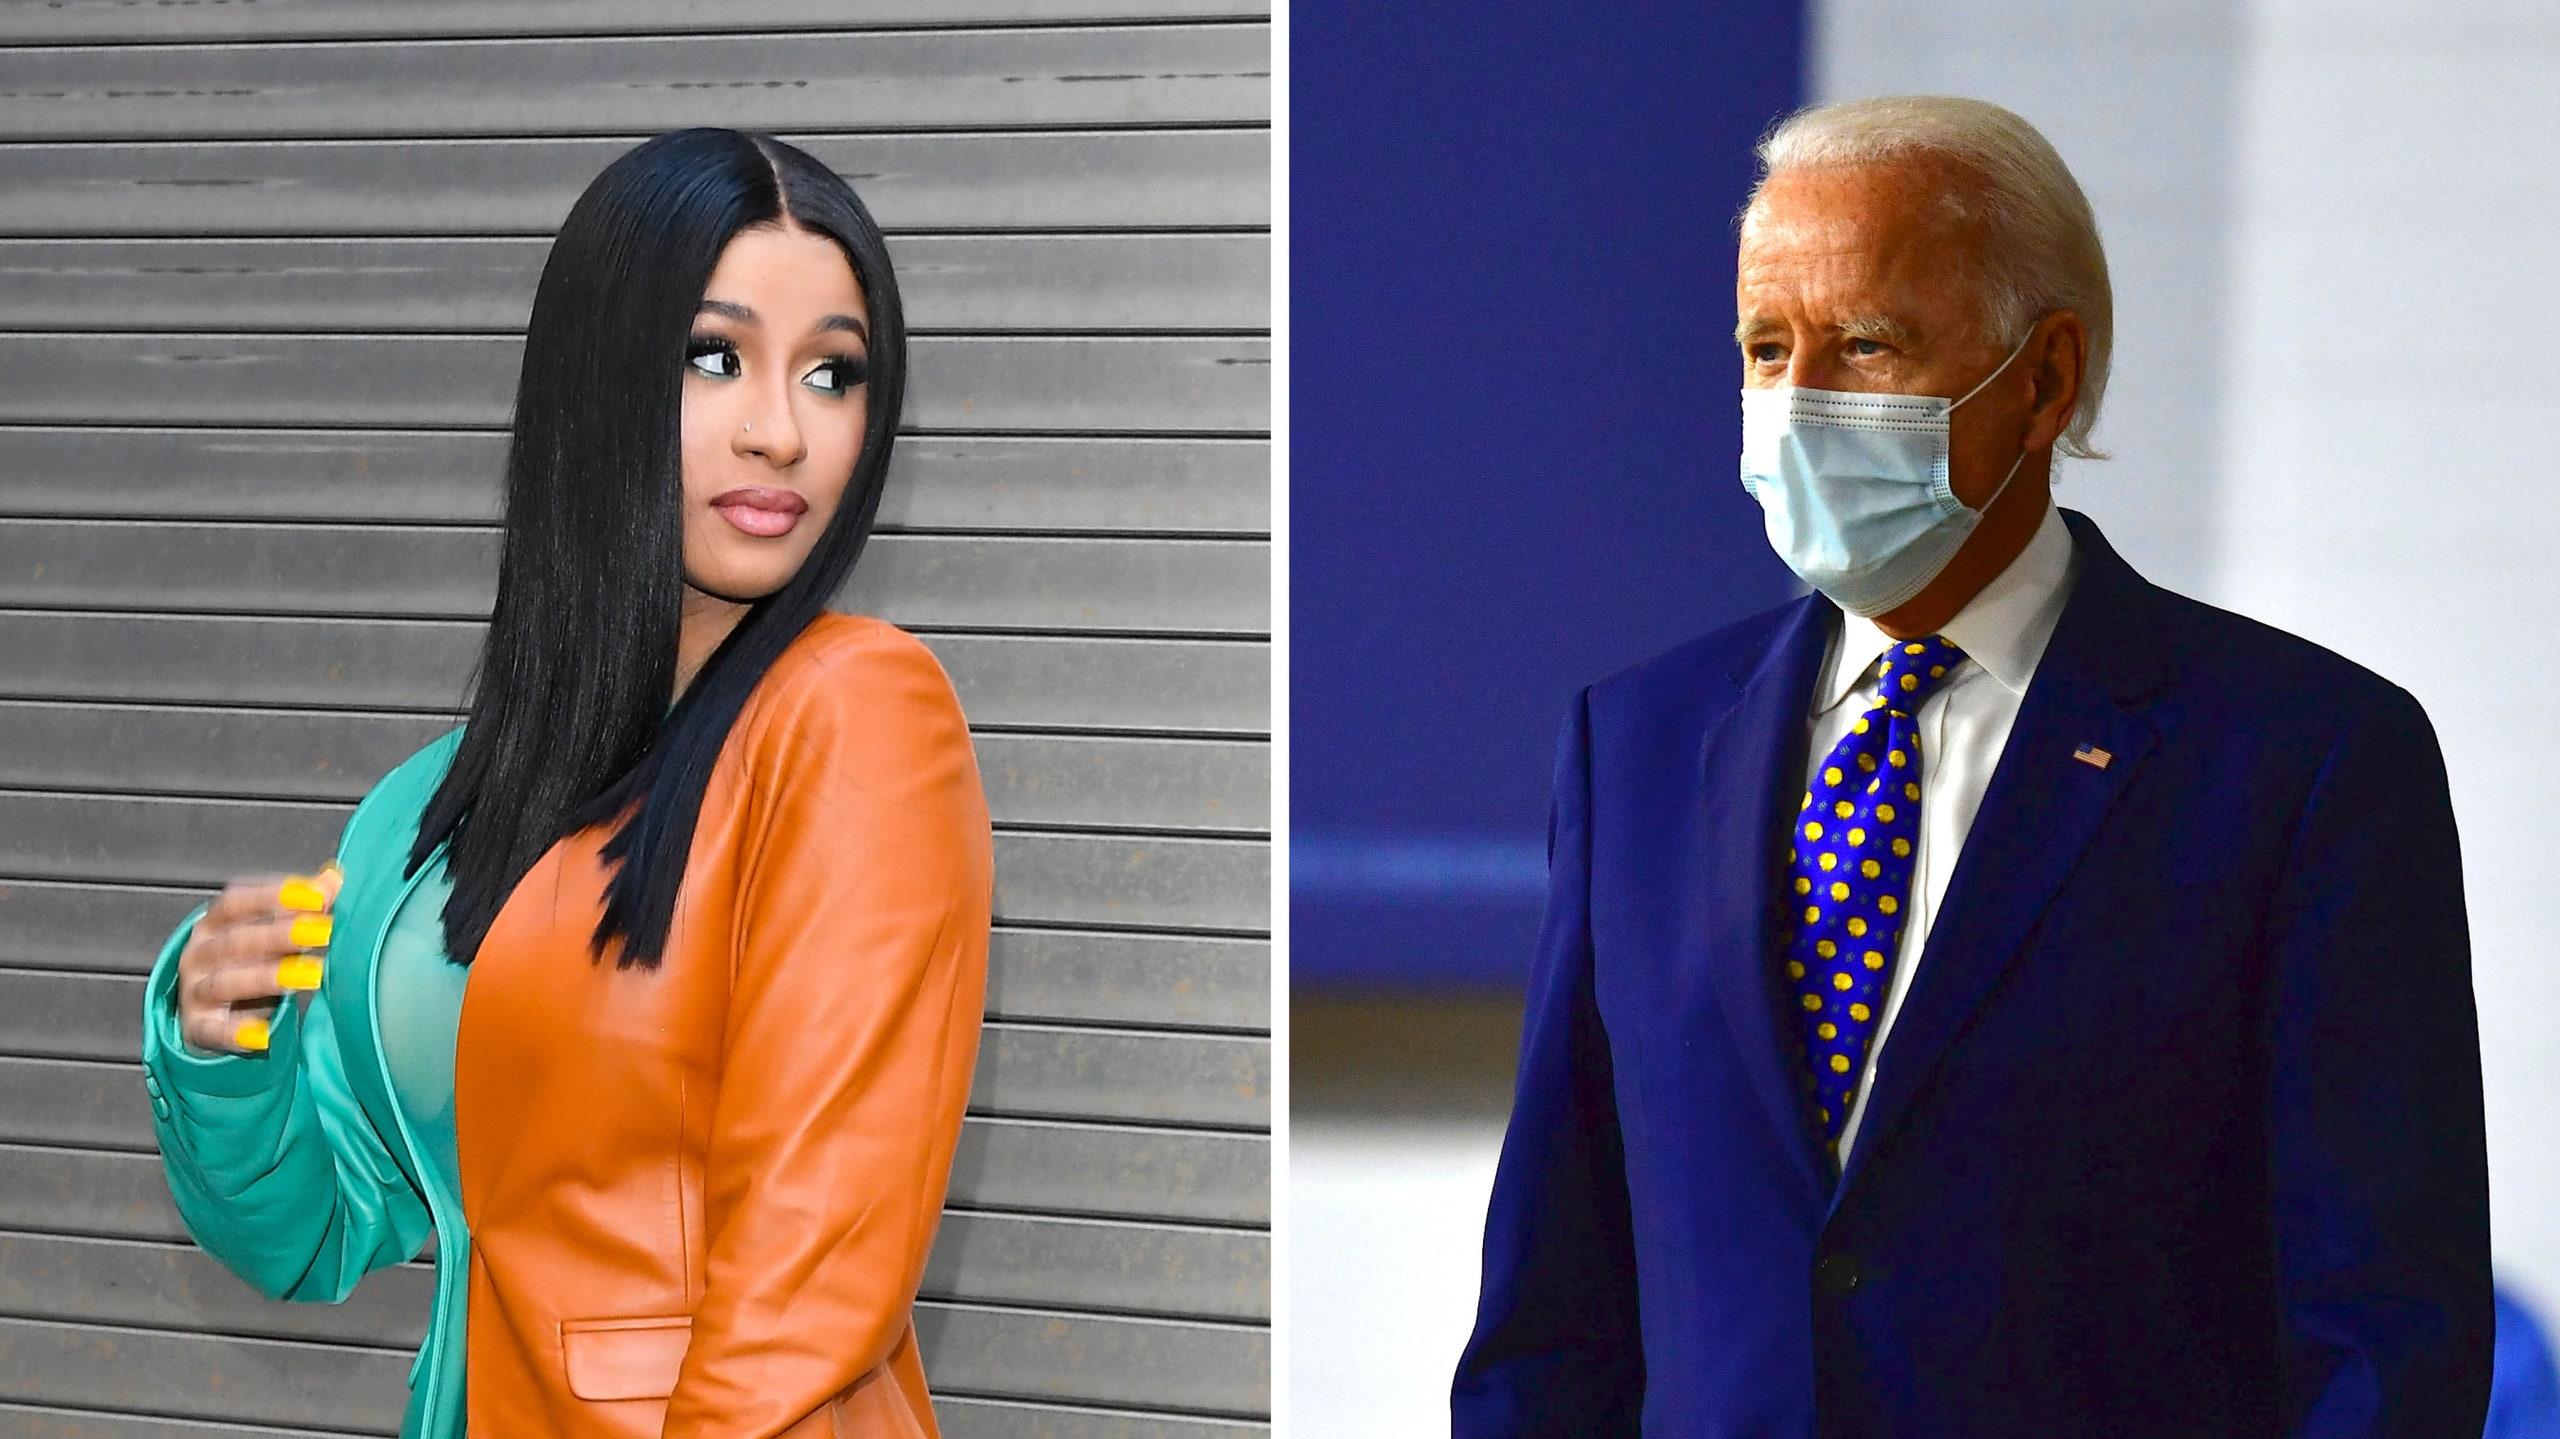 Cardi B Asked Joe Biden About College Health Care And